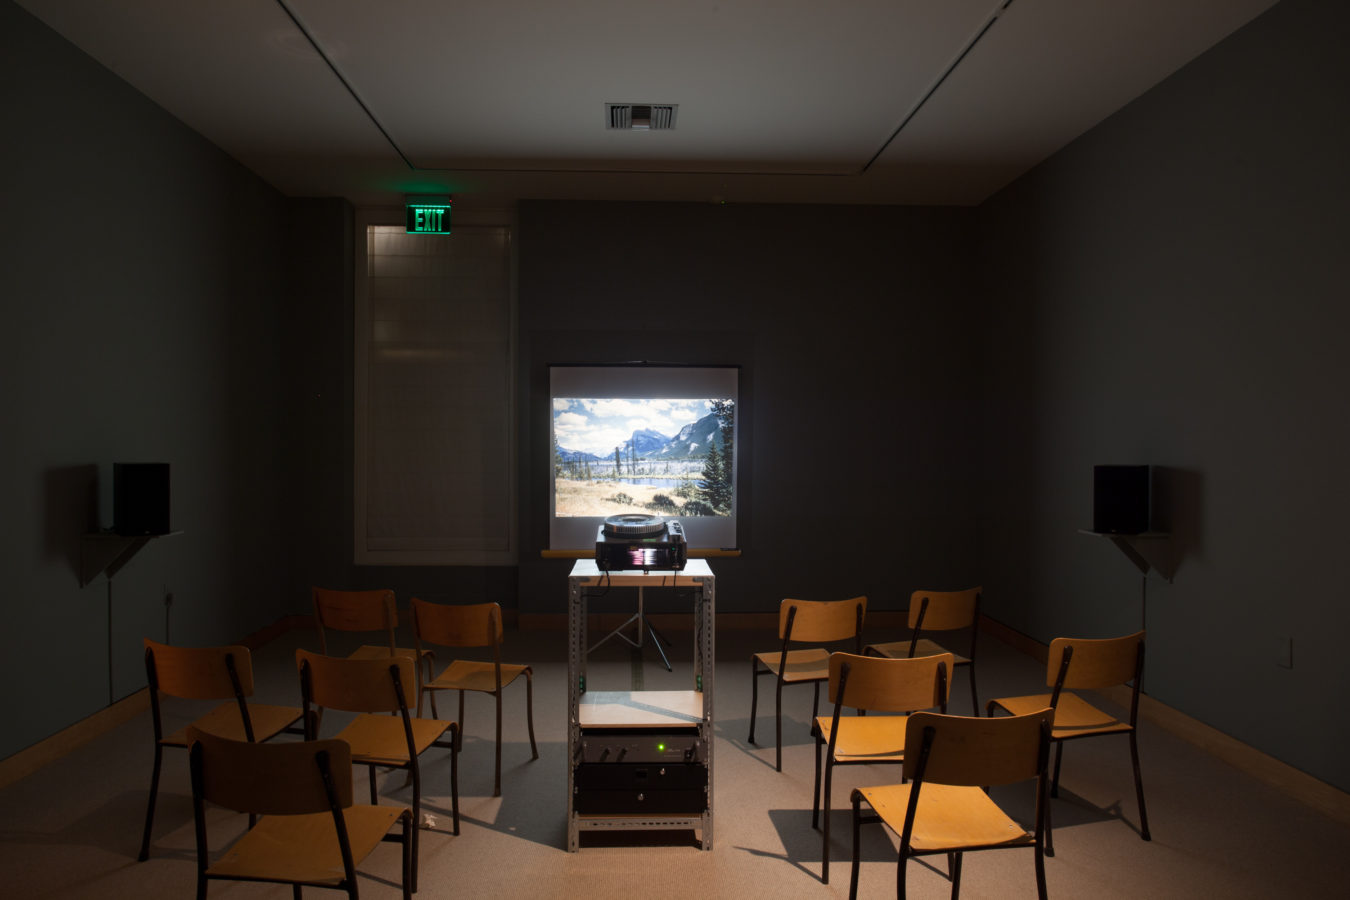 Photograph of an installation of a slide projector, flanked by chairs, projecting a color landscape onto a screen